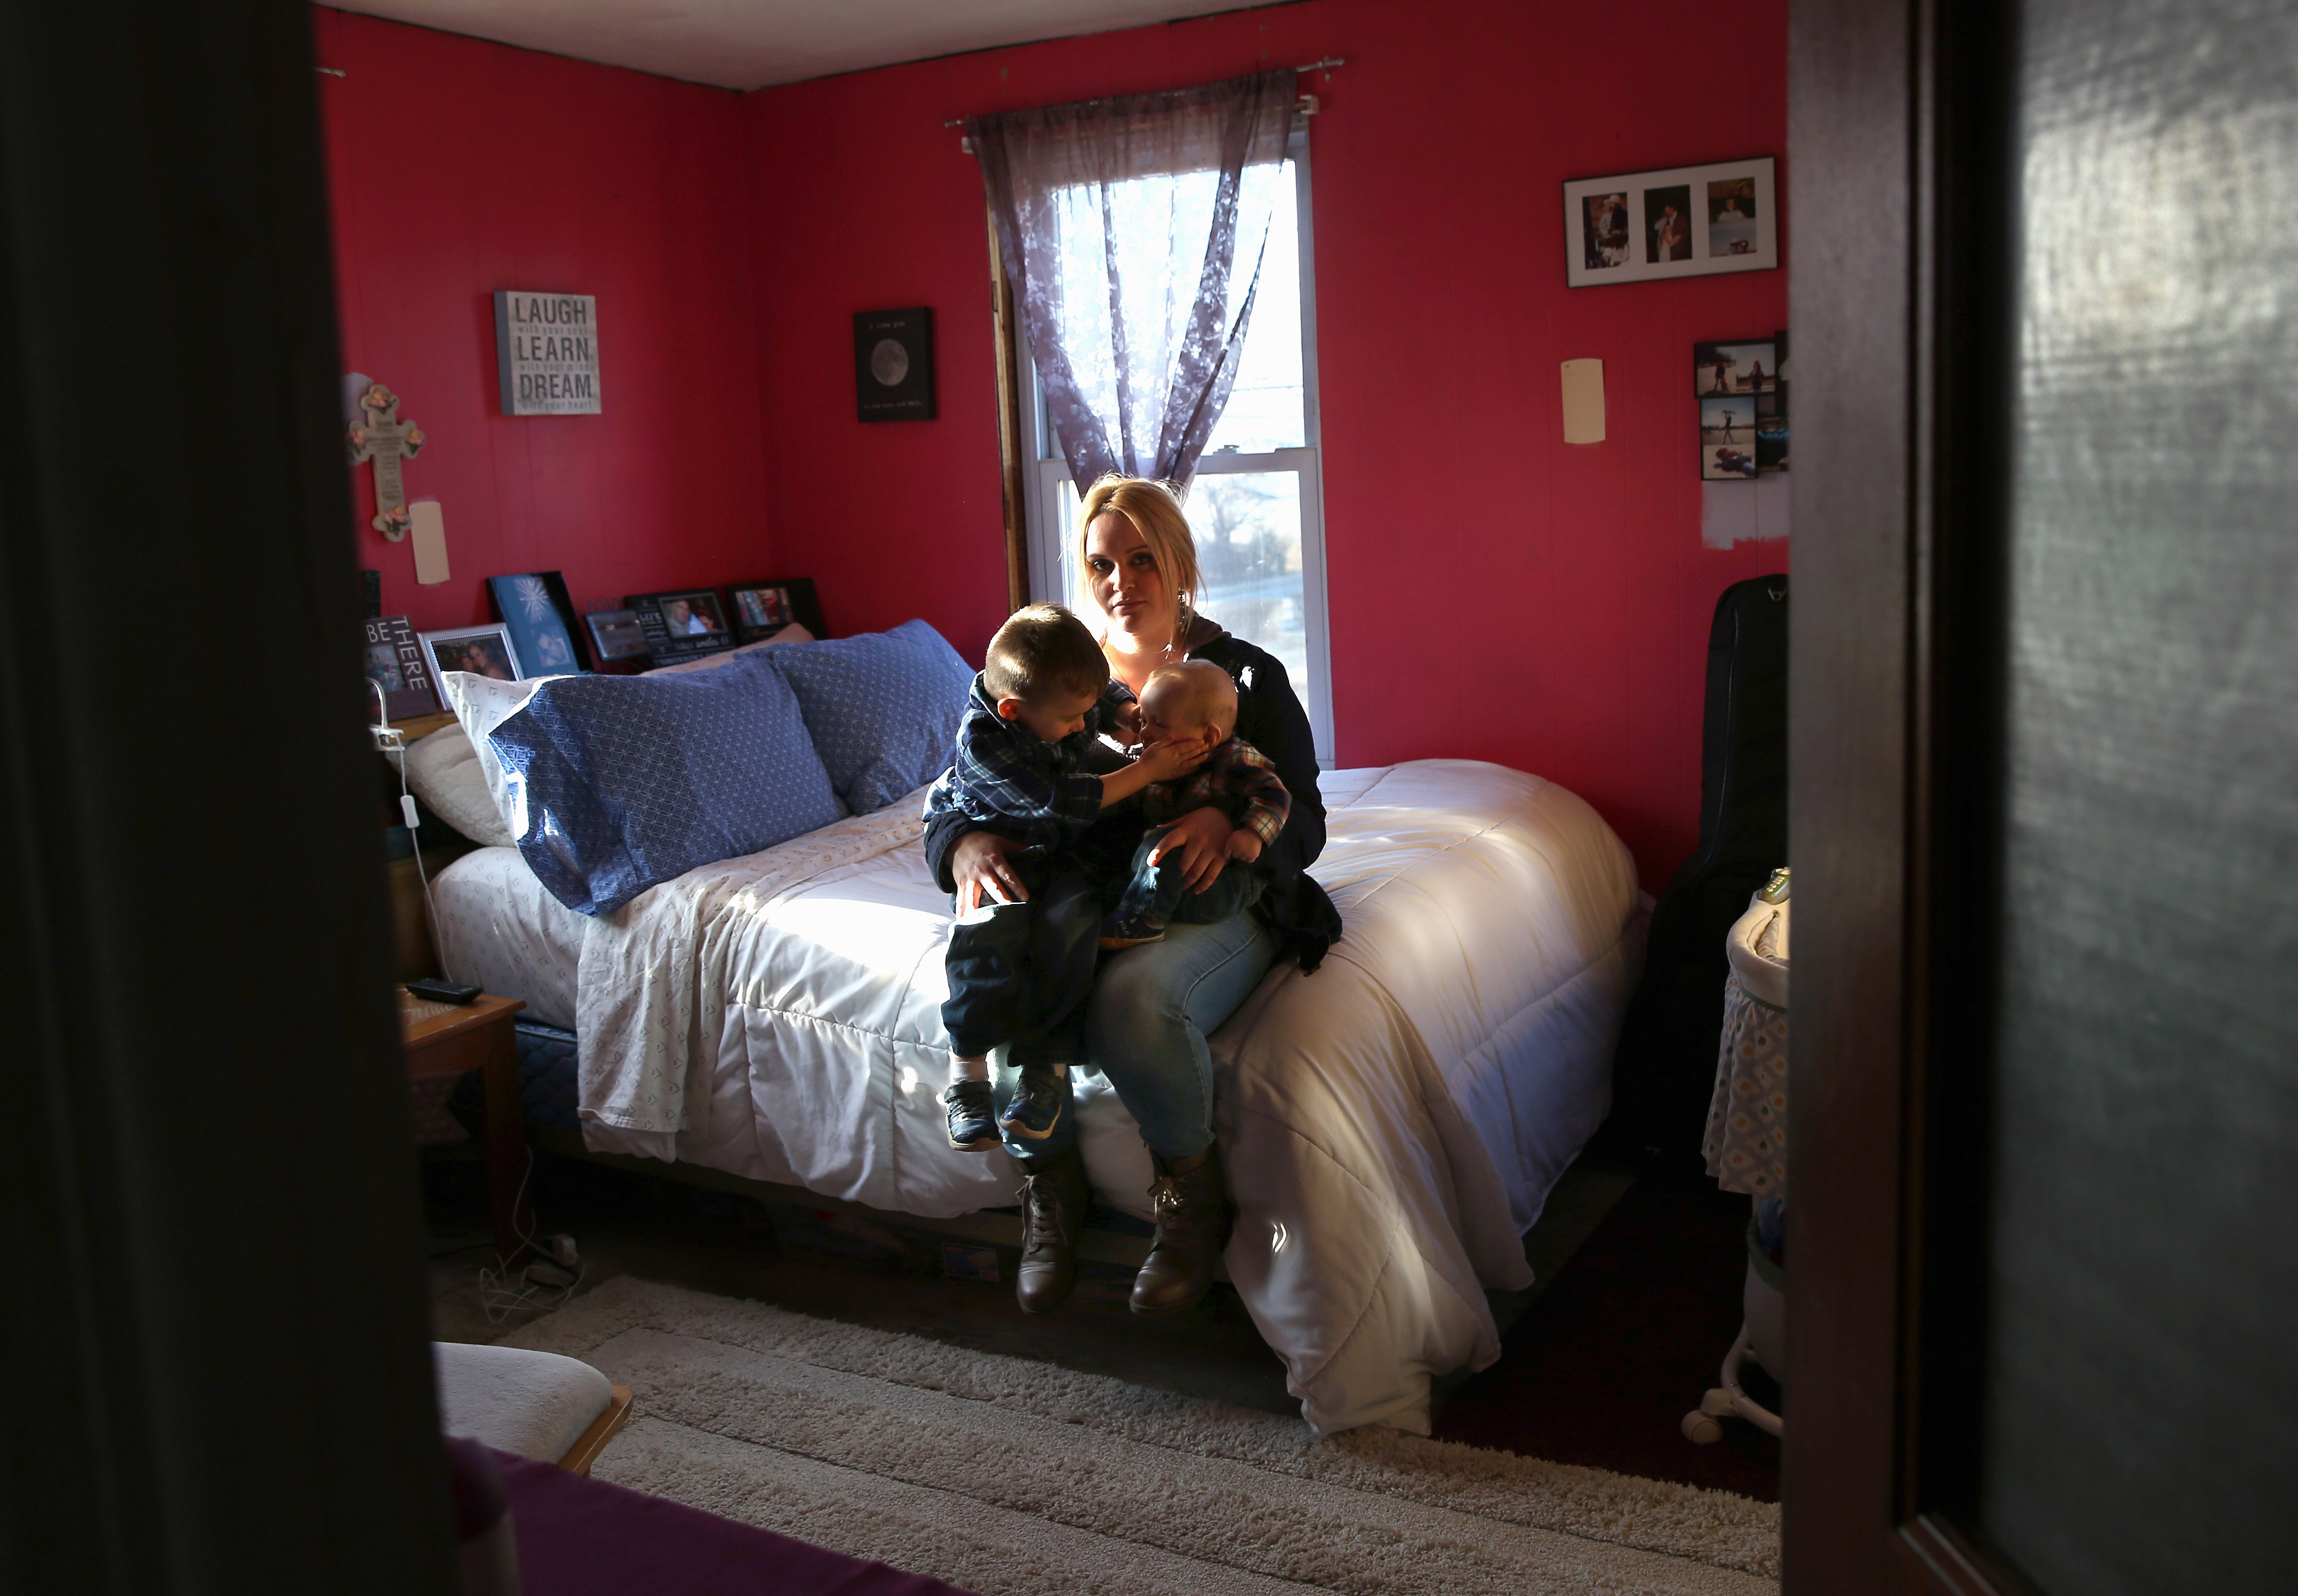 Hillary Comparone, 25, holds her children Cameron Comparone, 2 1/2 years, and Lincoln, 4 1/2 months, in her bedroom on March 6, 2016 in Plainville, Connecticut while marking the first anniversary of the death of the children's father Benjamin Comparone, 27, who died of heroin overdose. (Photo by John Moore/Getty Images)